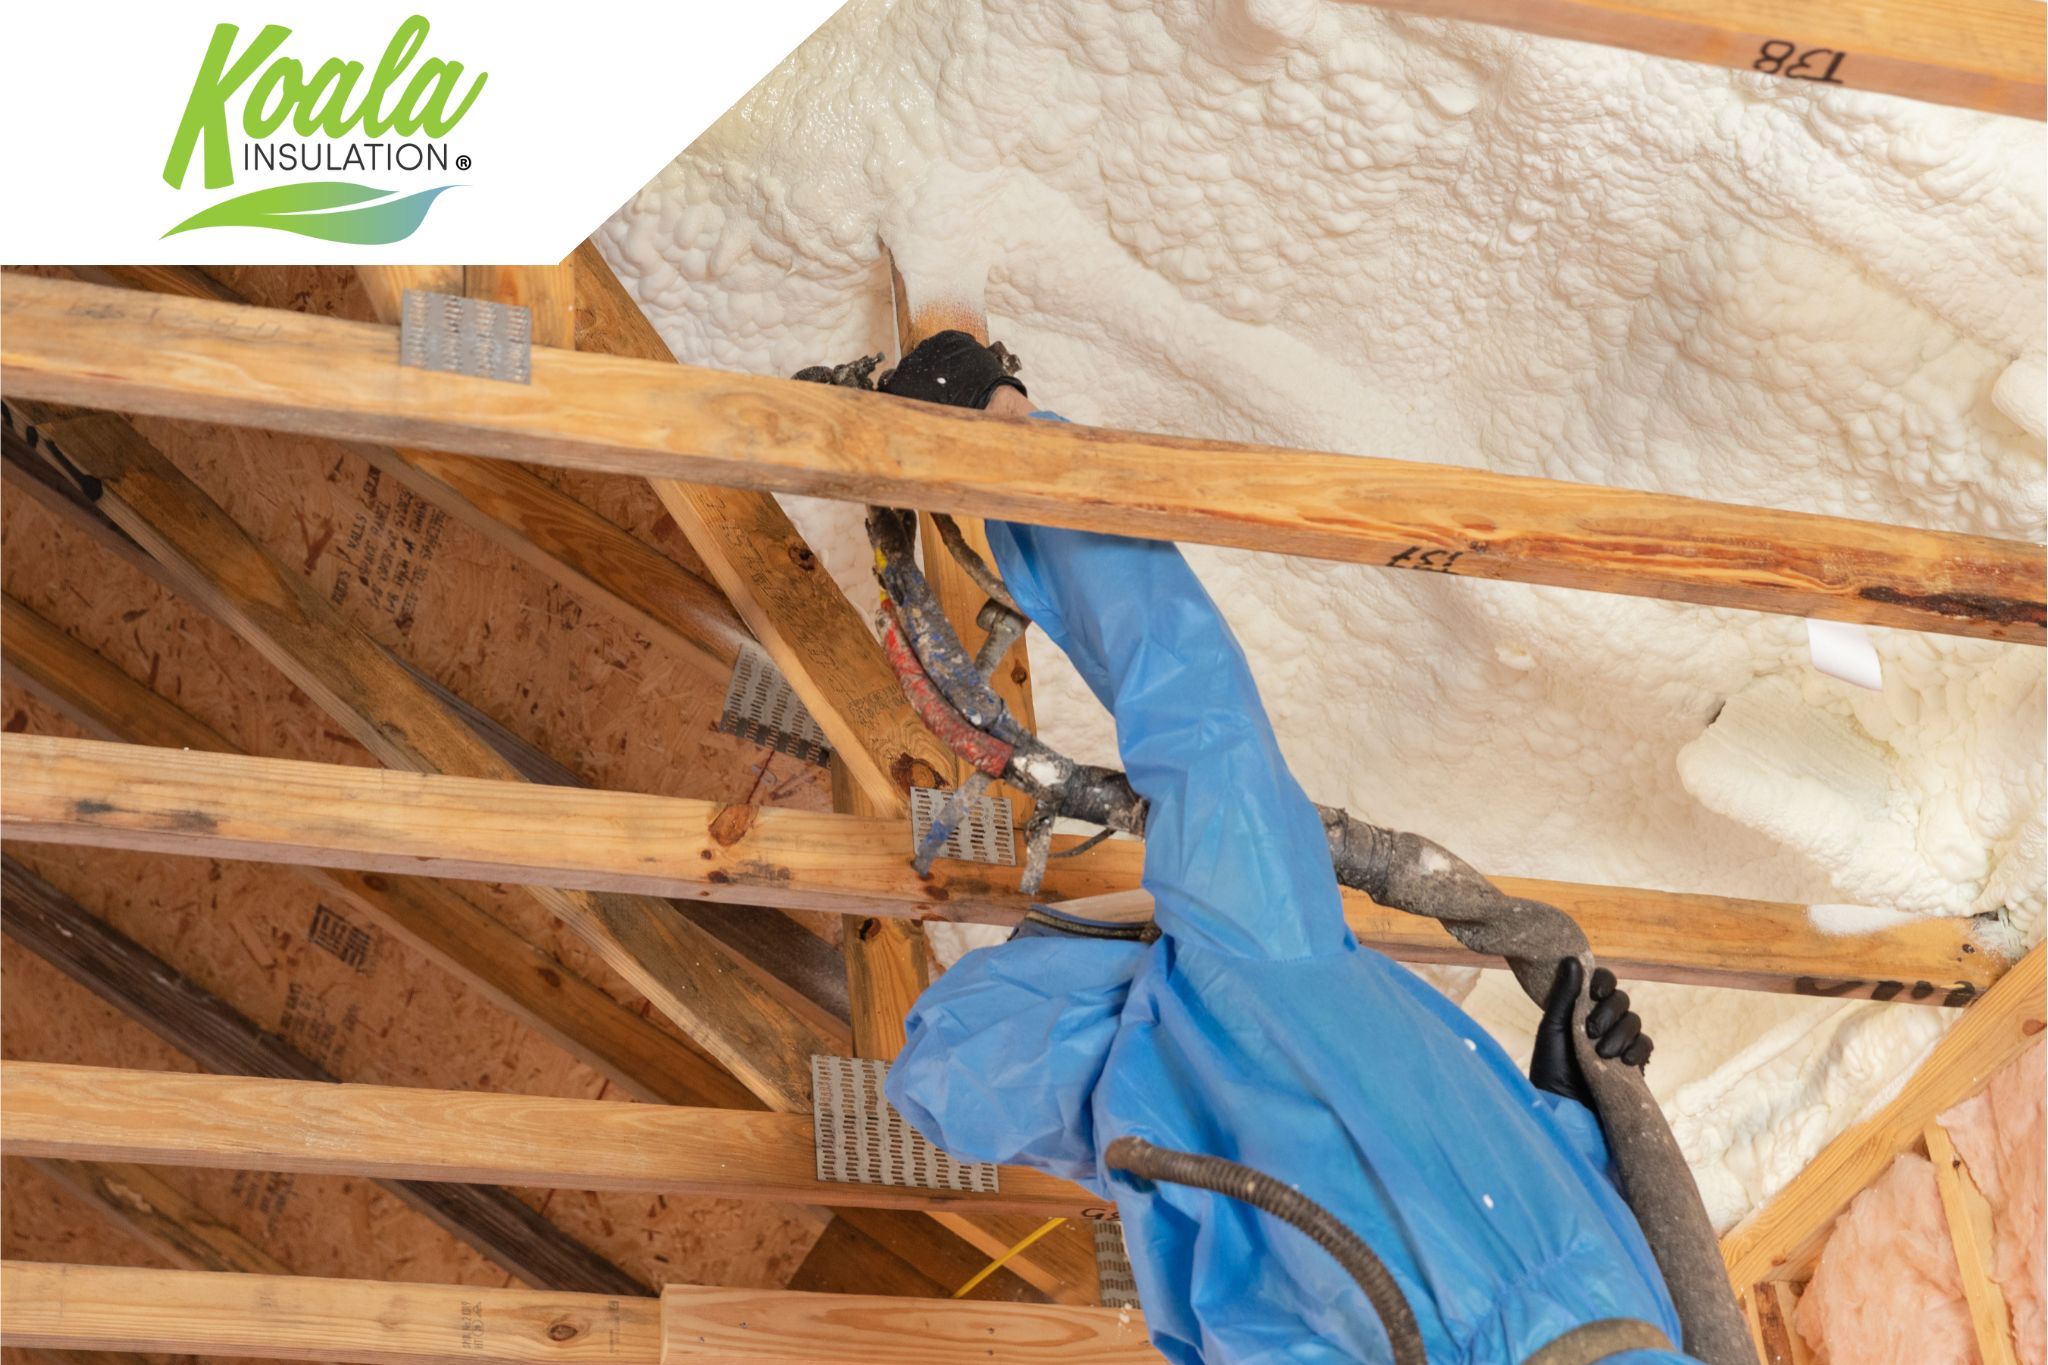 Expanding The Possibilities In Open Cell Spray Foam Insulation